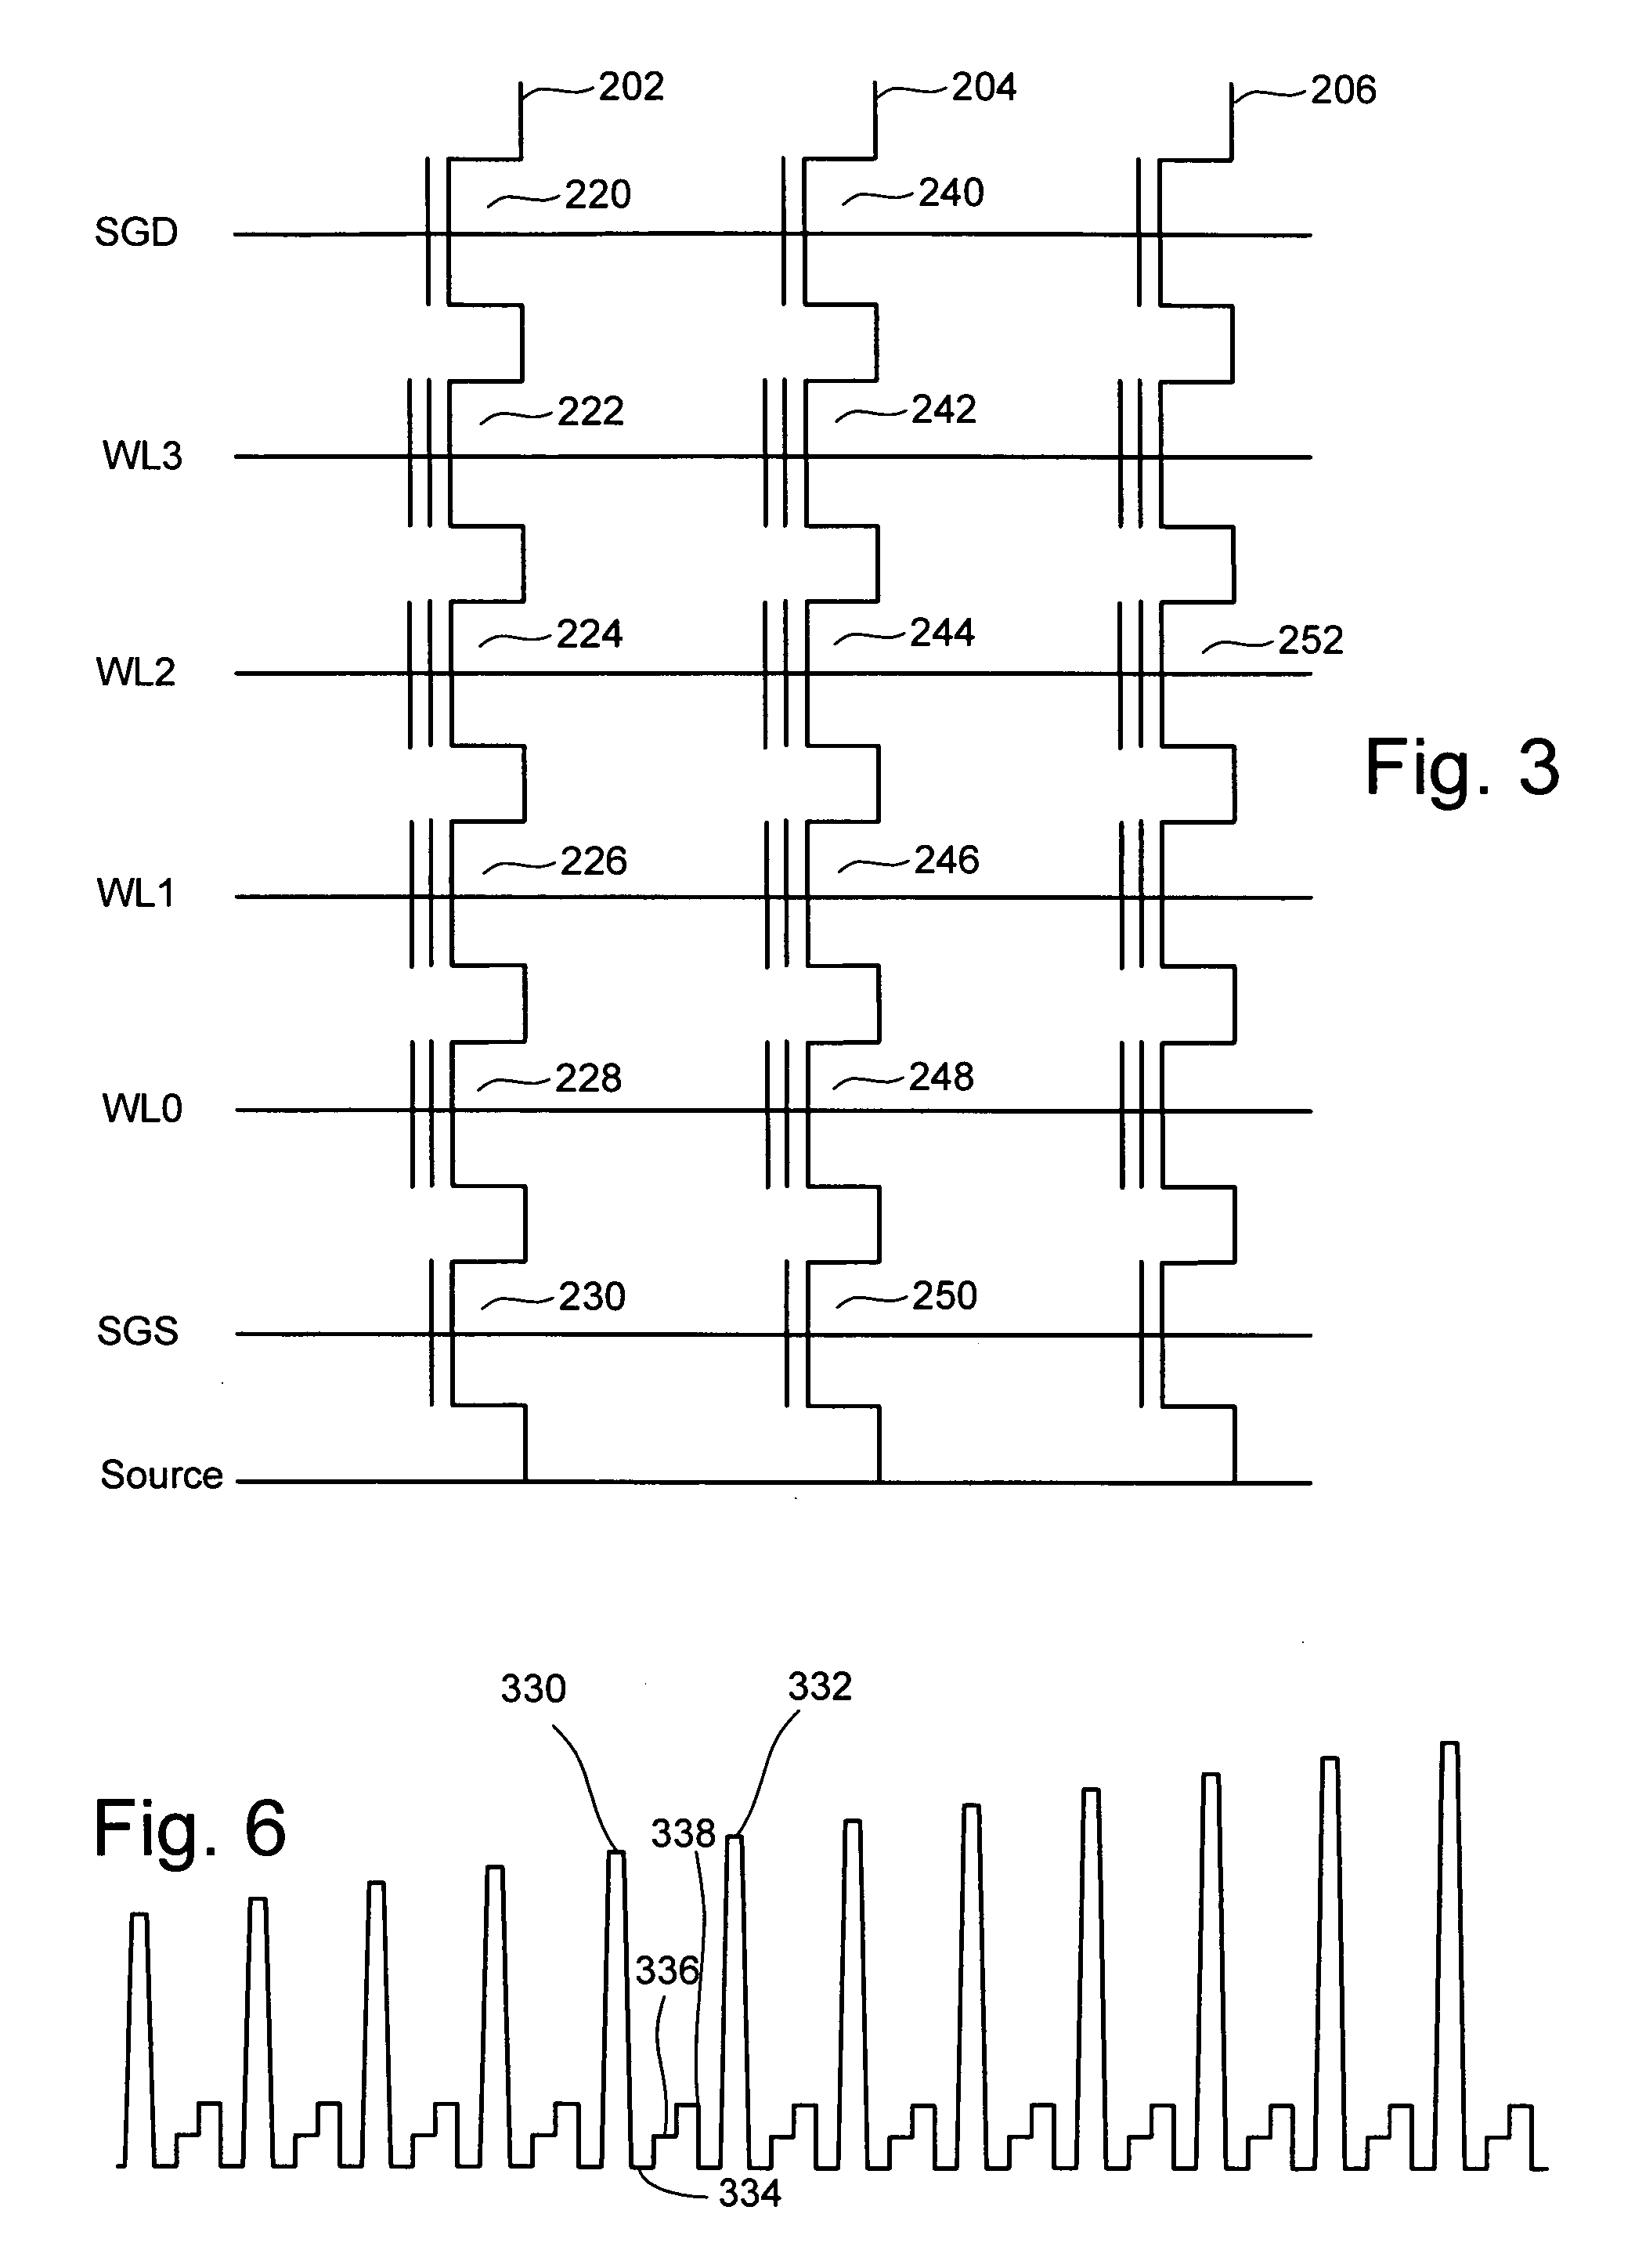 Erasing non-volatile memory utilizing changing word line conditions to compensate for slower erasing memory cells